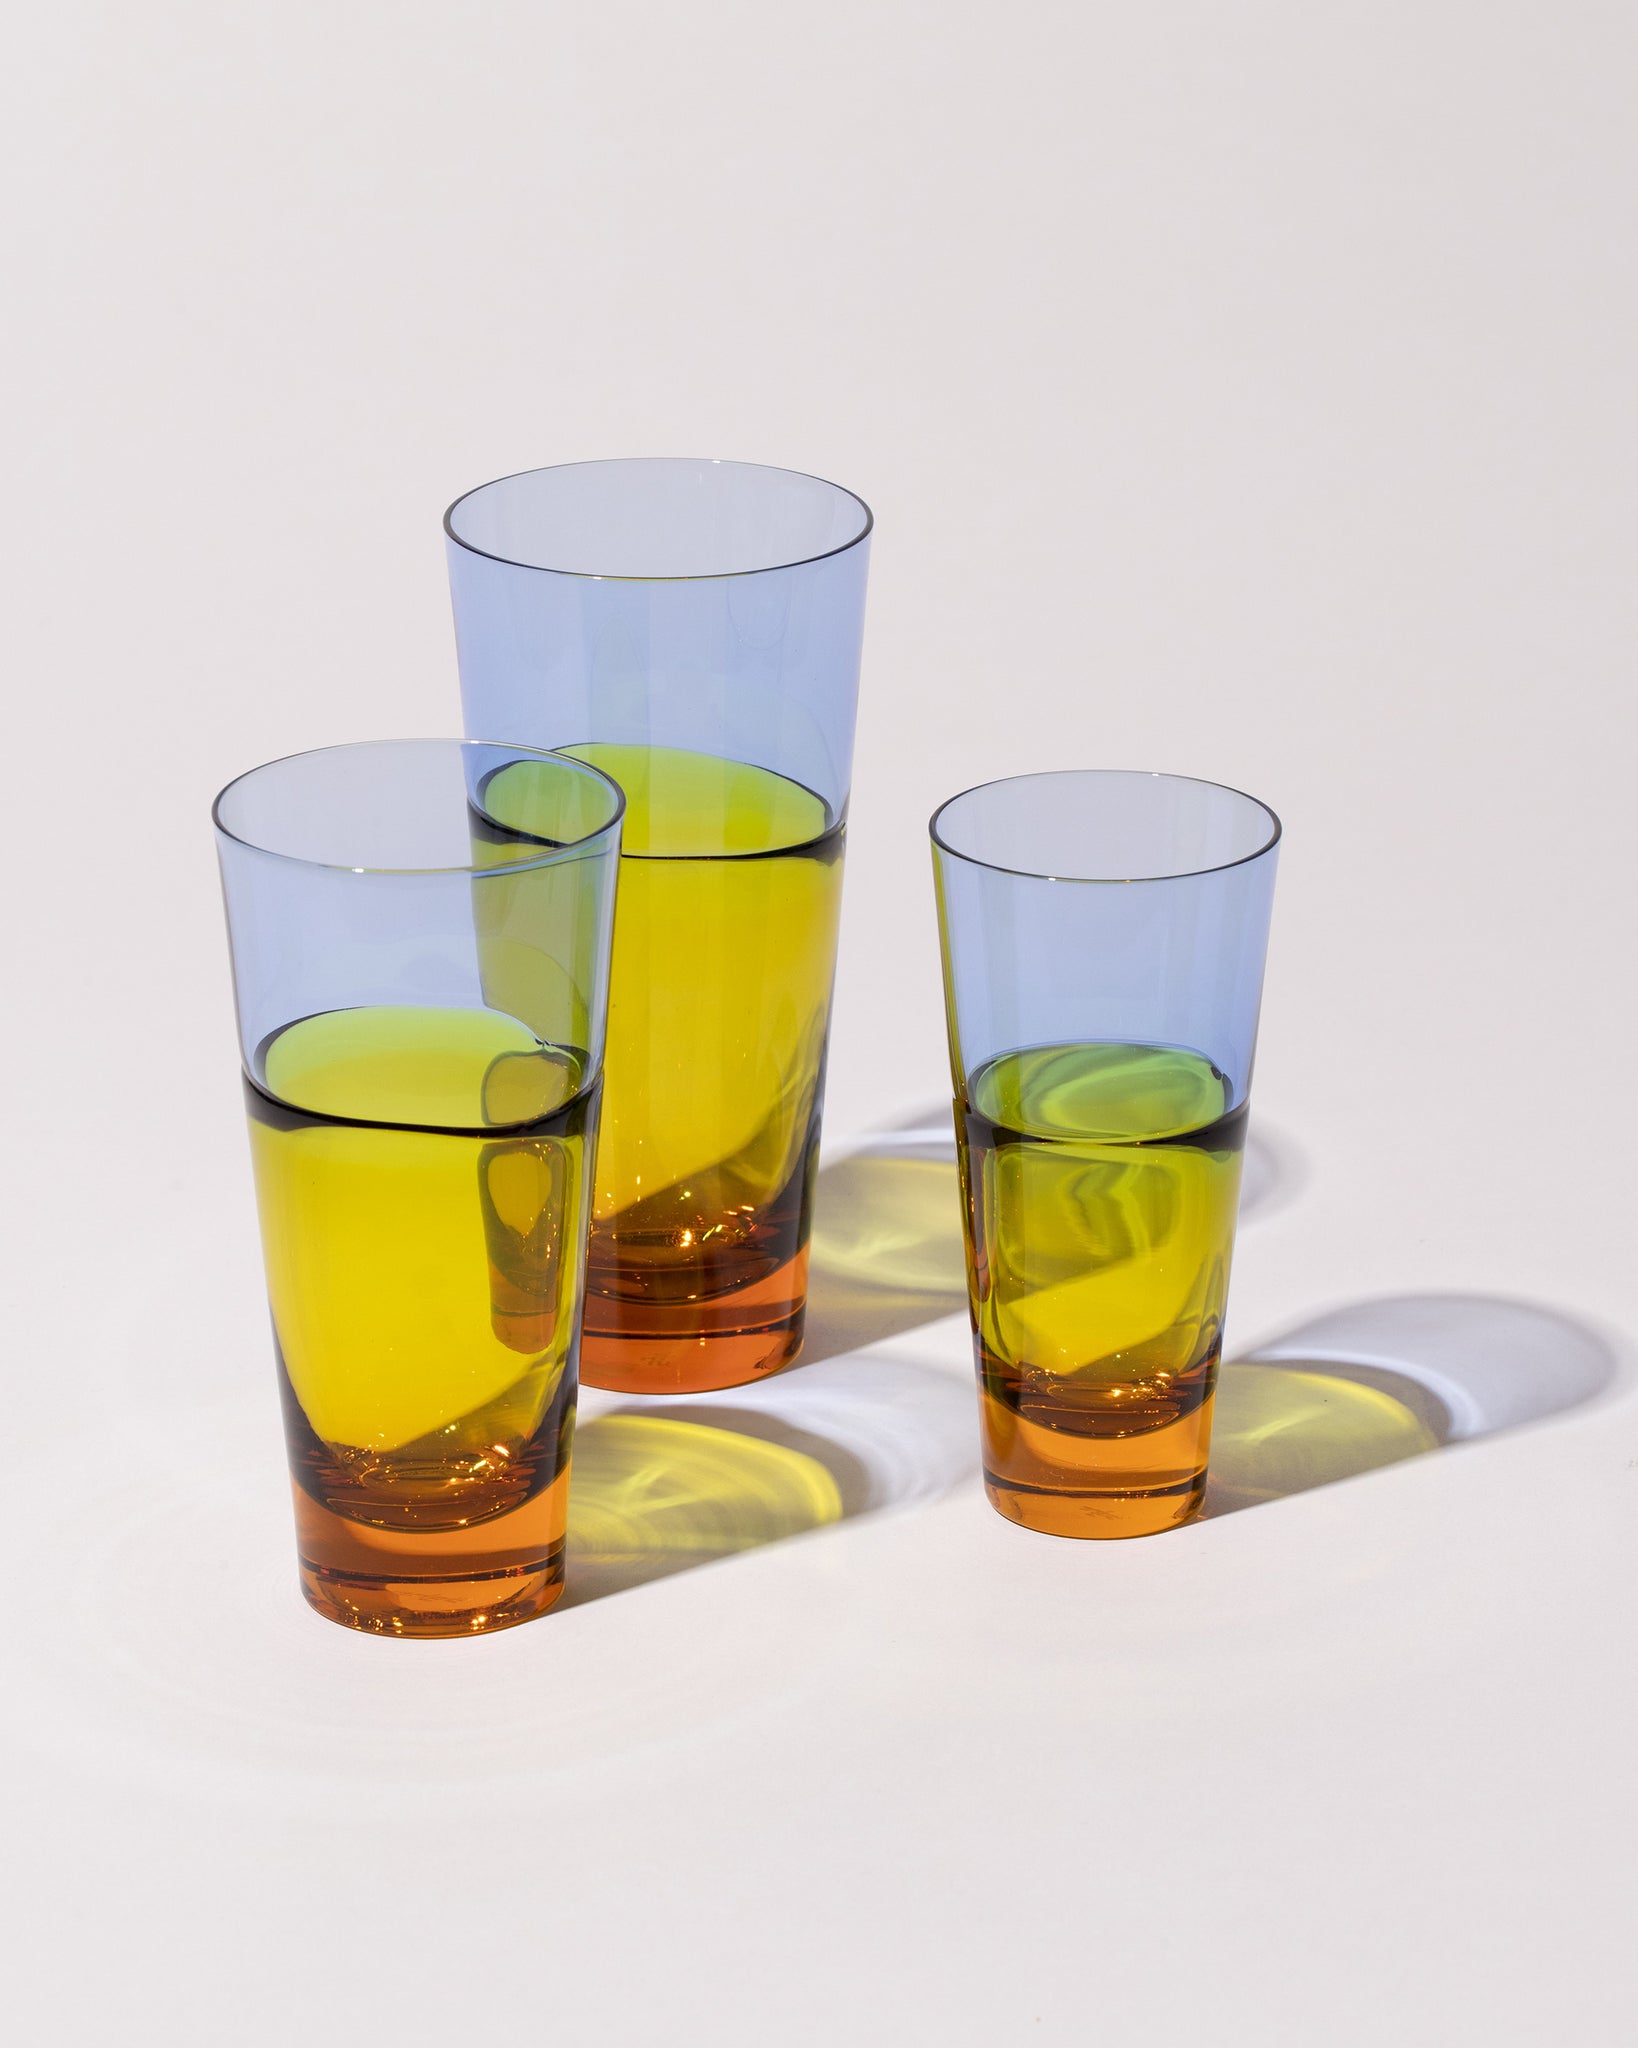 Sugahara Glassworks Collection glass Duo Tumblers with light blue, yellow and ochre details, on a neutral-light background.